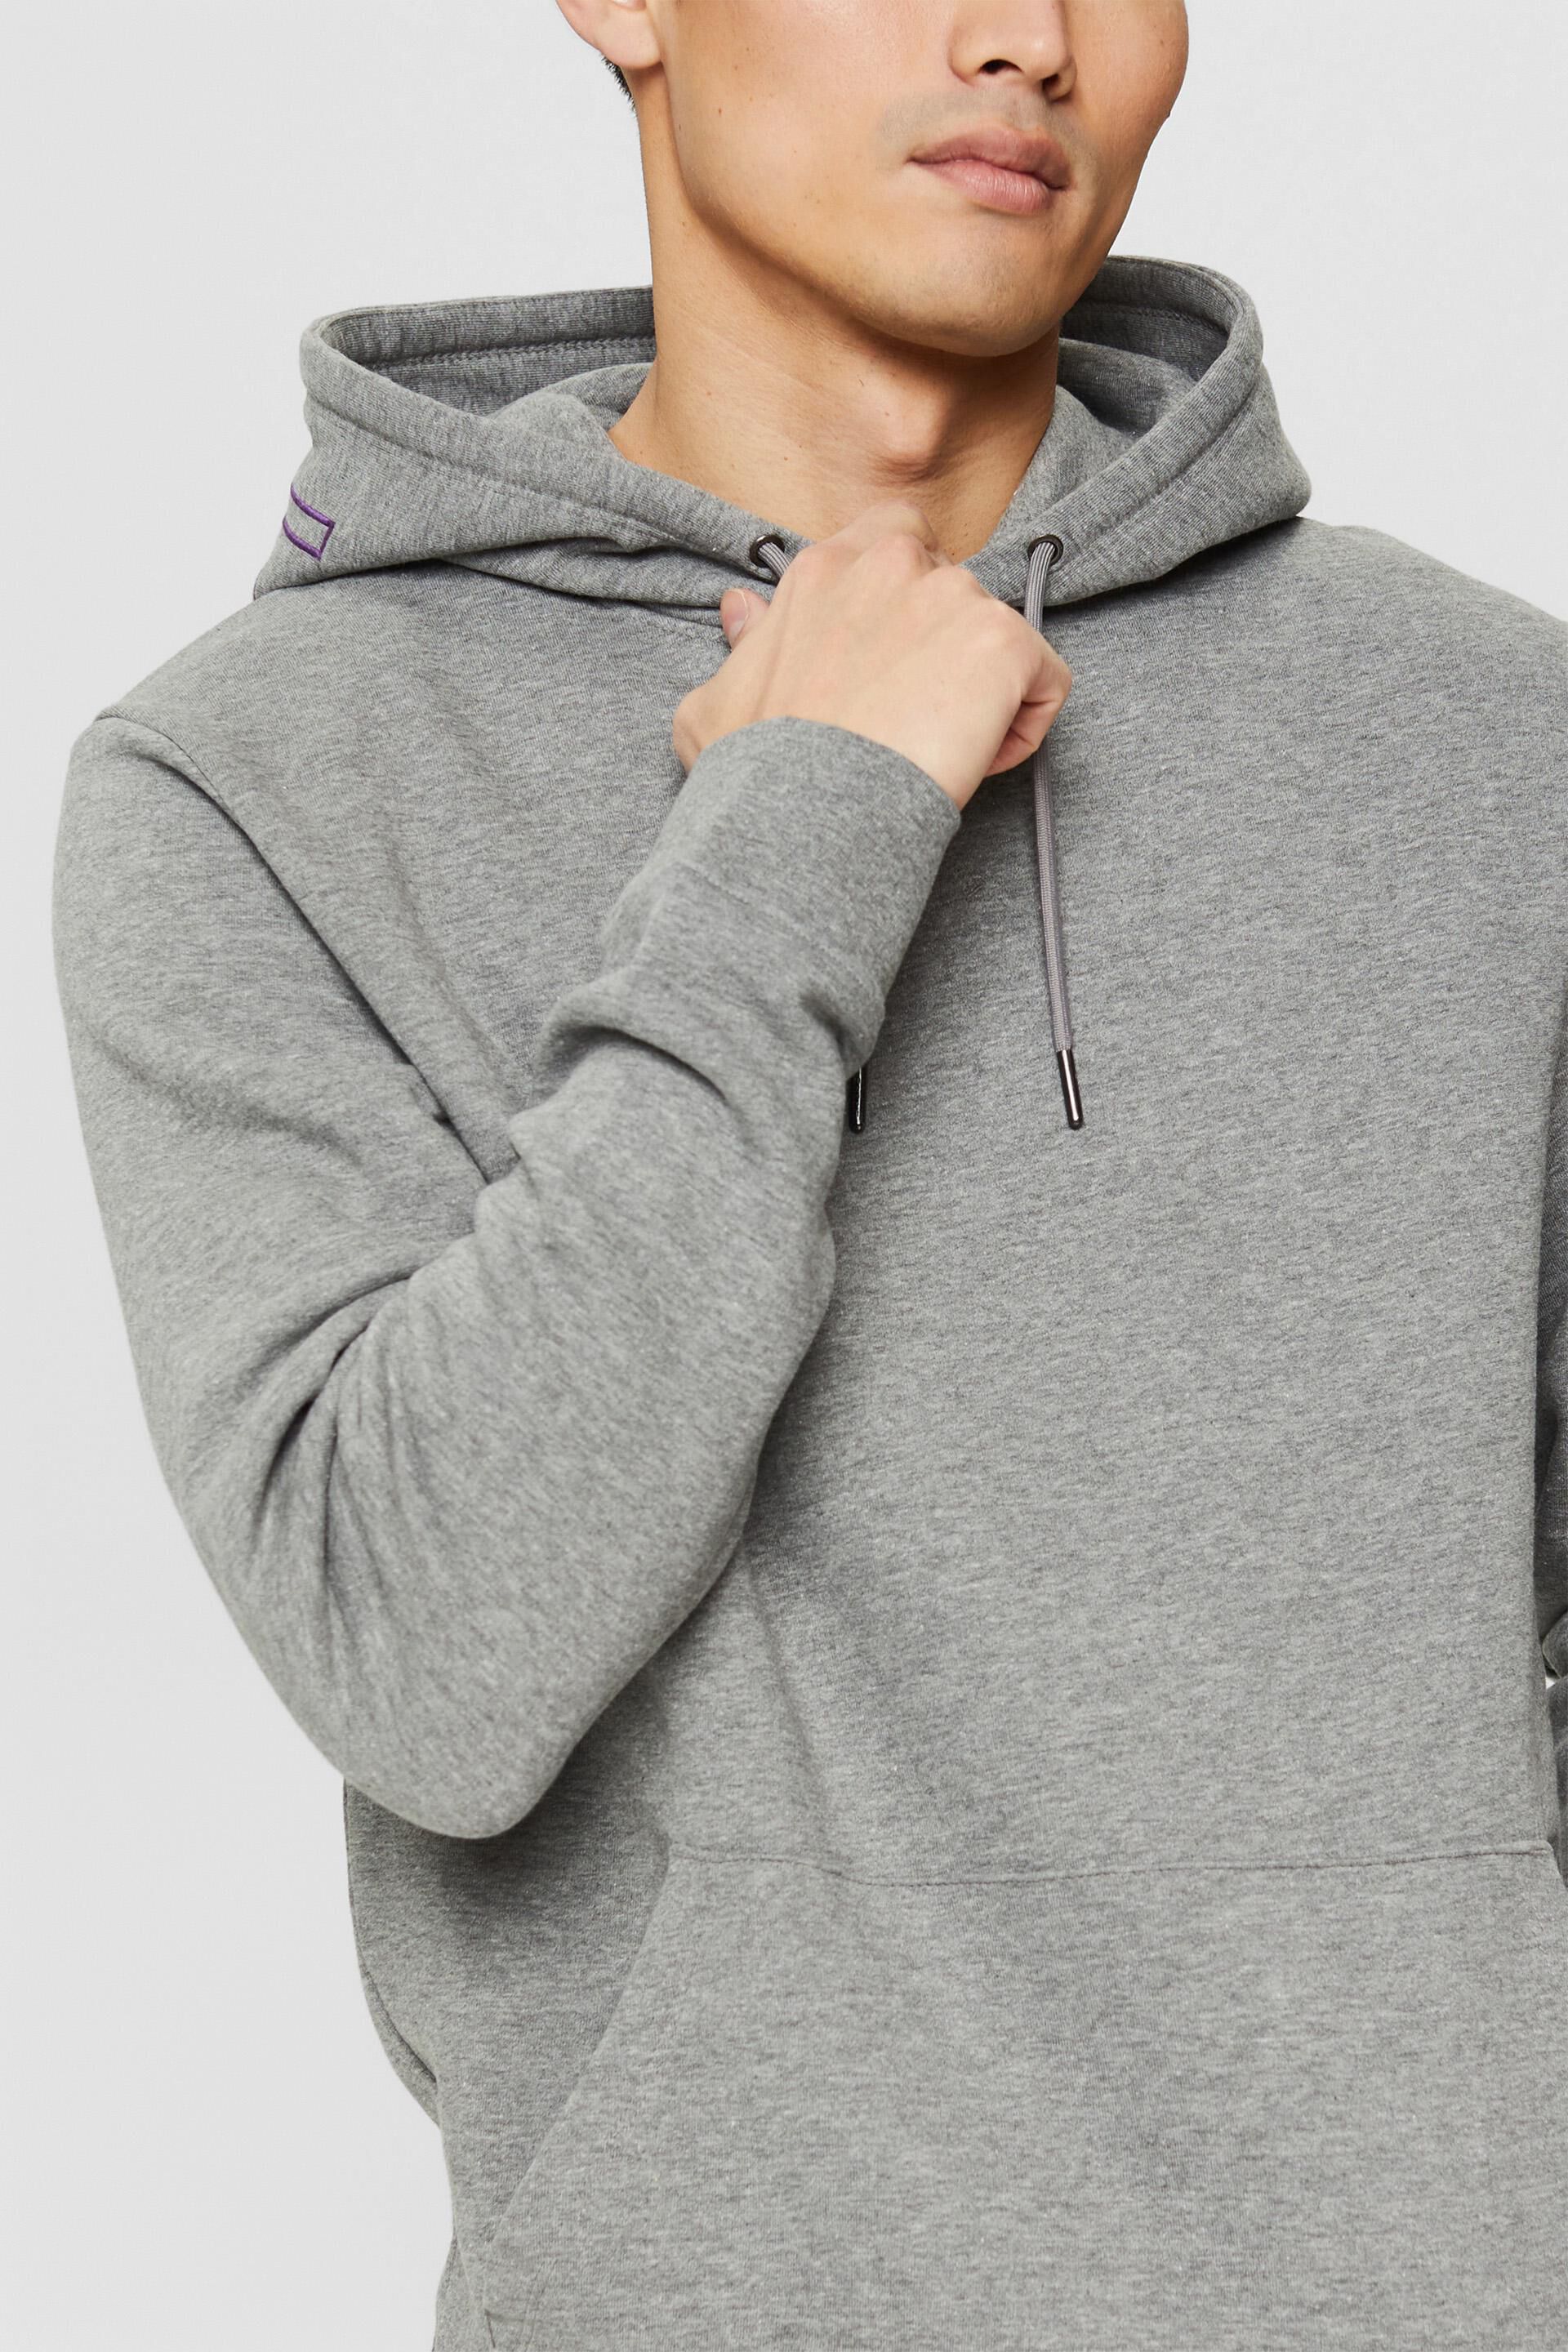 Esprit embroidery with material: of sweatshirt hoodie recycled logo Made